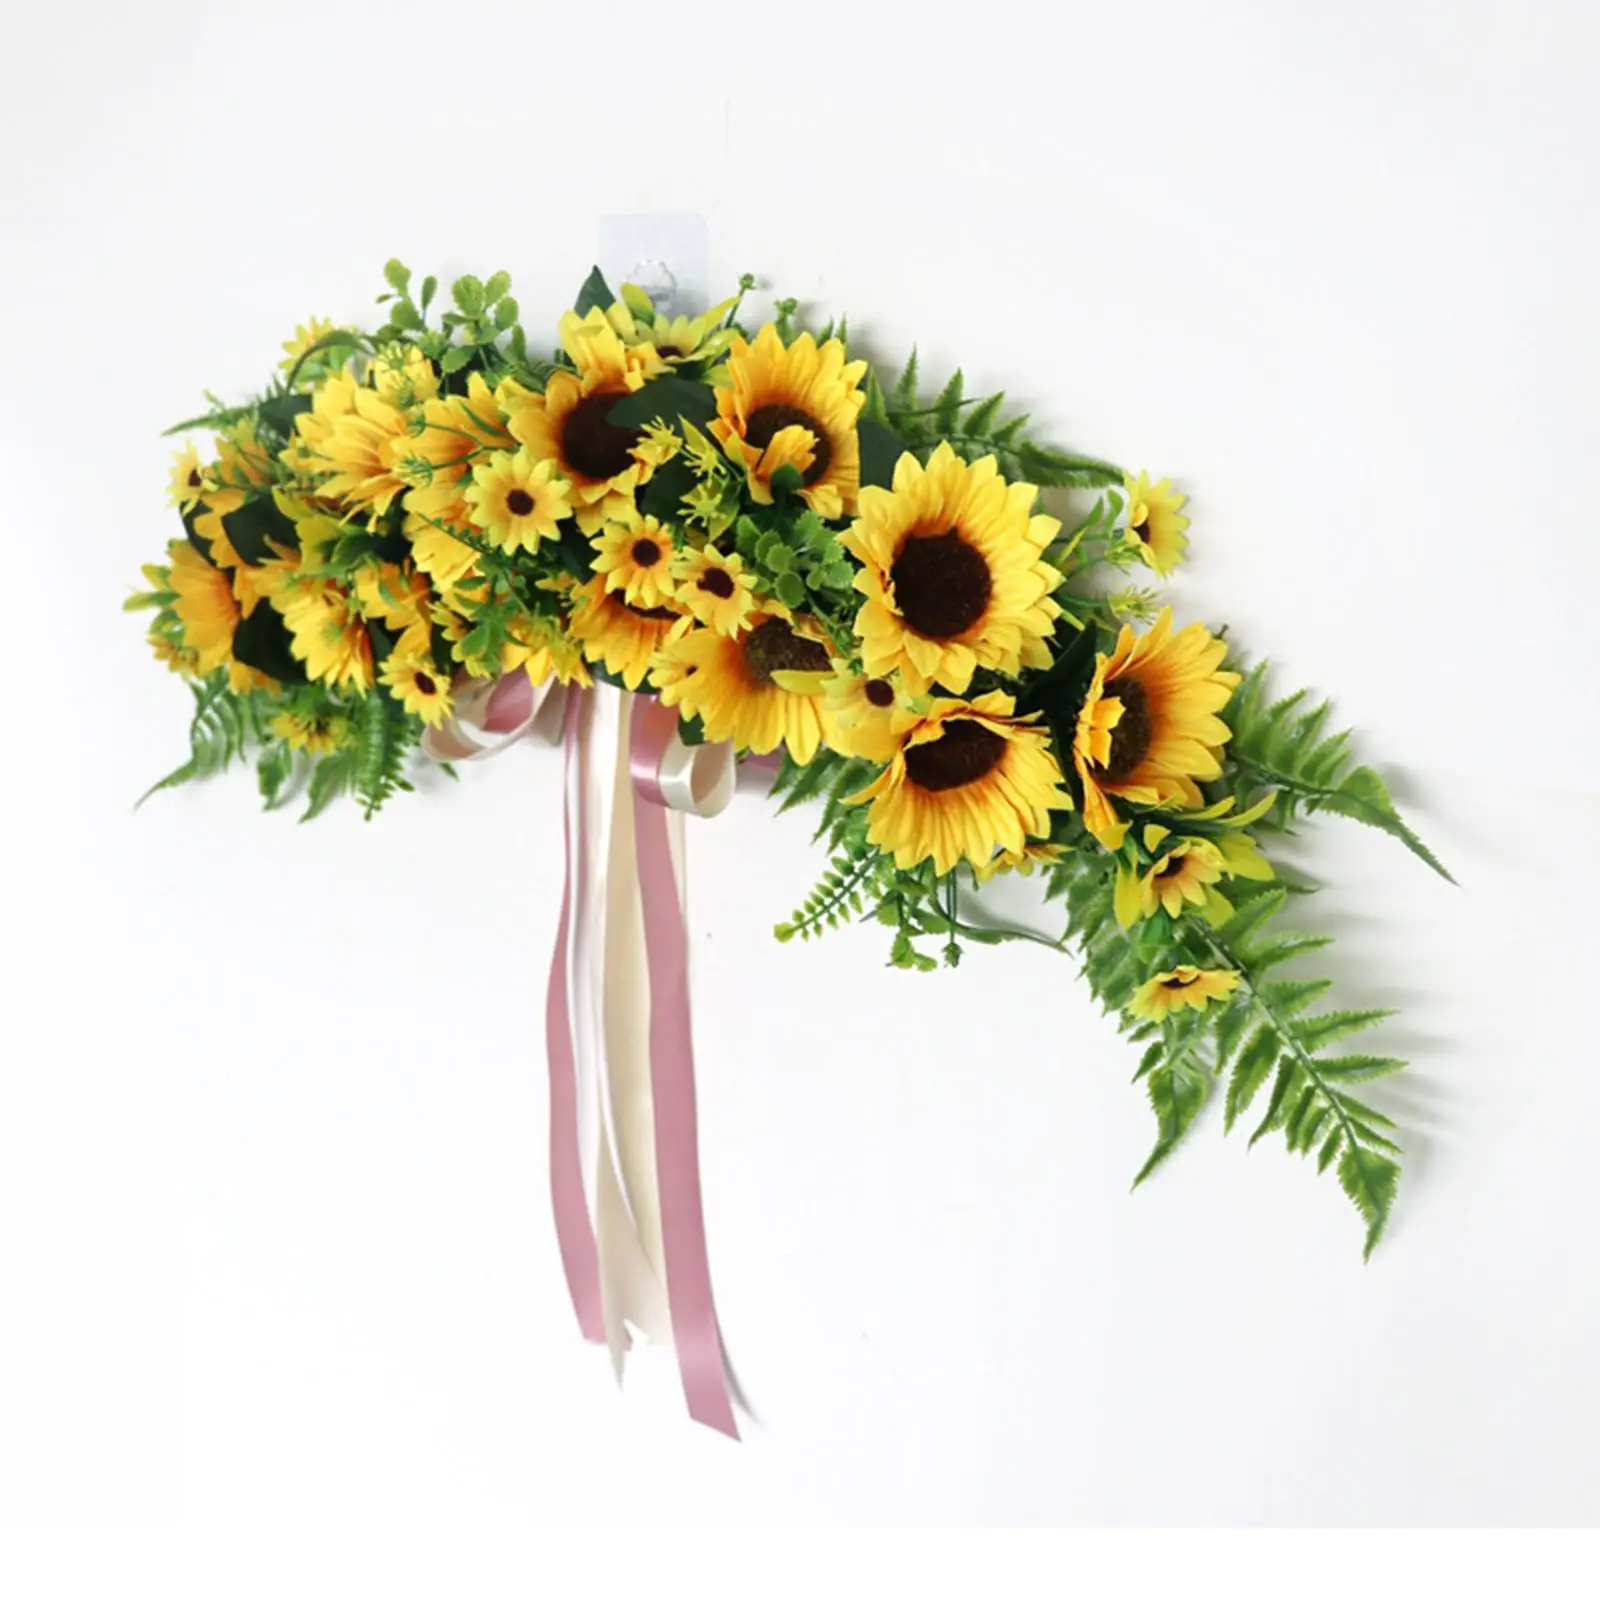 29 inch Artificial Sunflower Swag Floral Garland for Garden Party Decoration